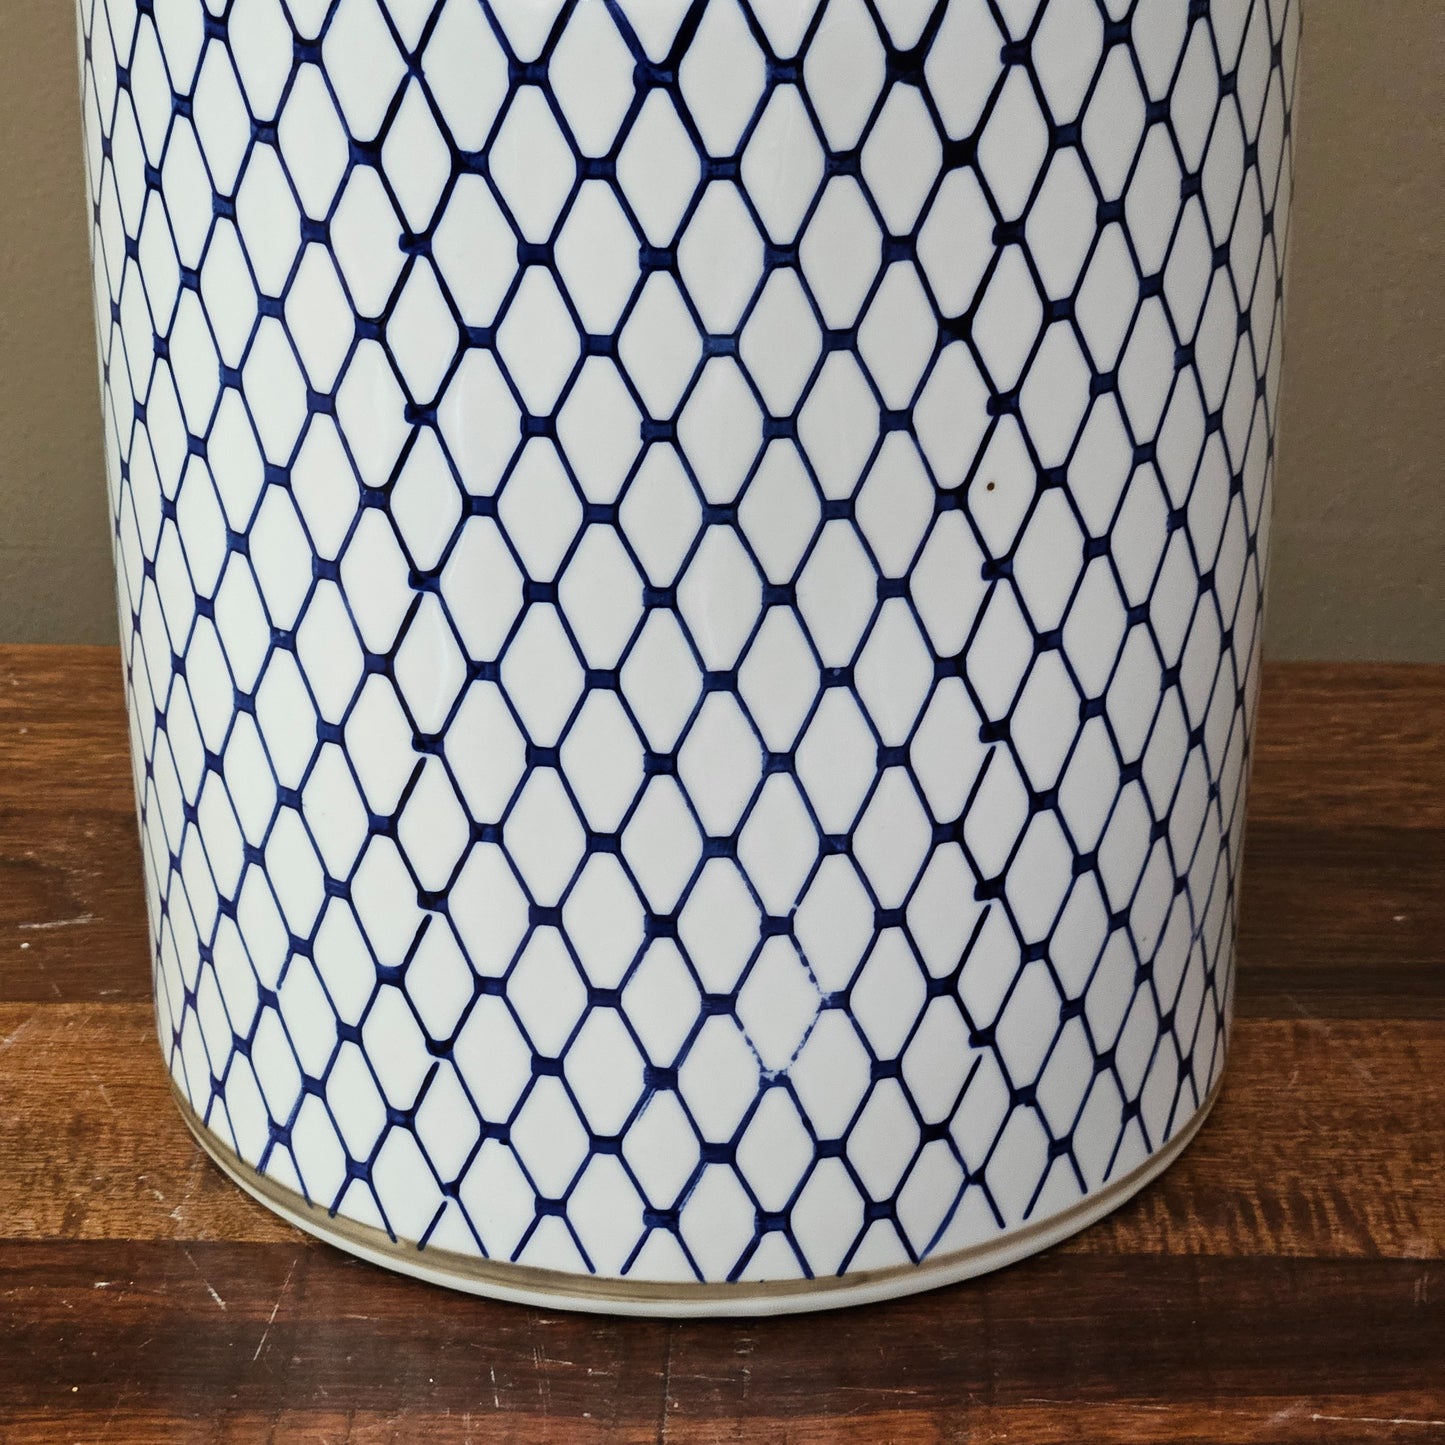 Medium Blue & White Porcelain Canister Jar with Netted Design & Lid ~ Multiple Available